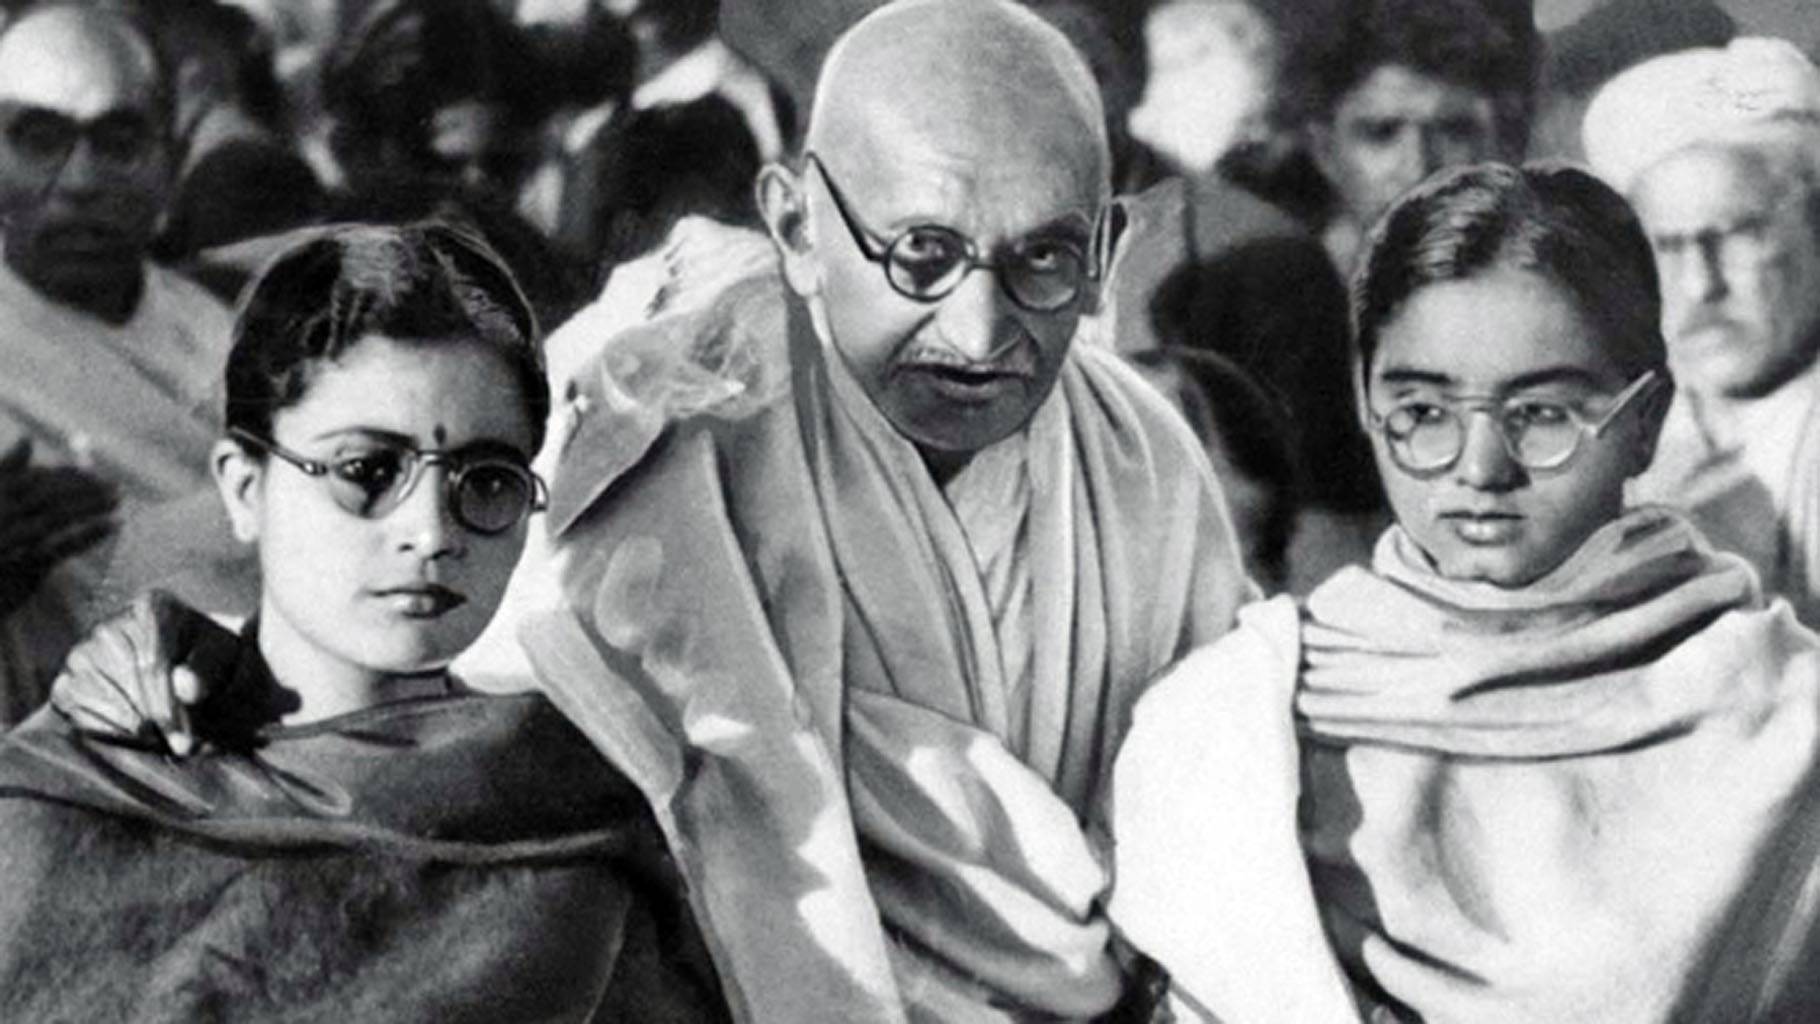 gandhi-brahmacharya-experiments-with-young-girls-12